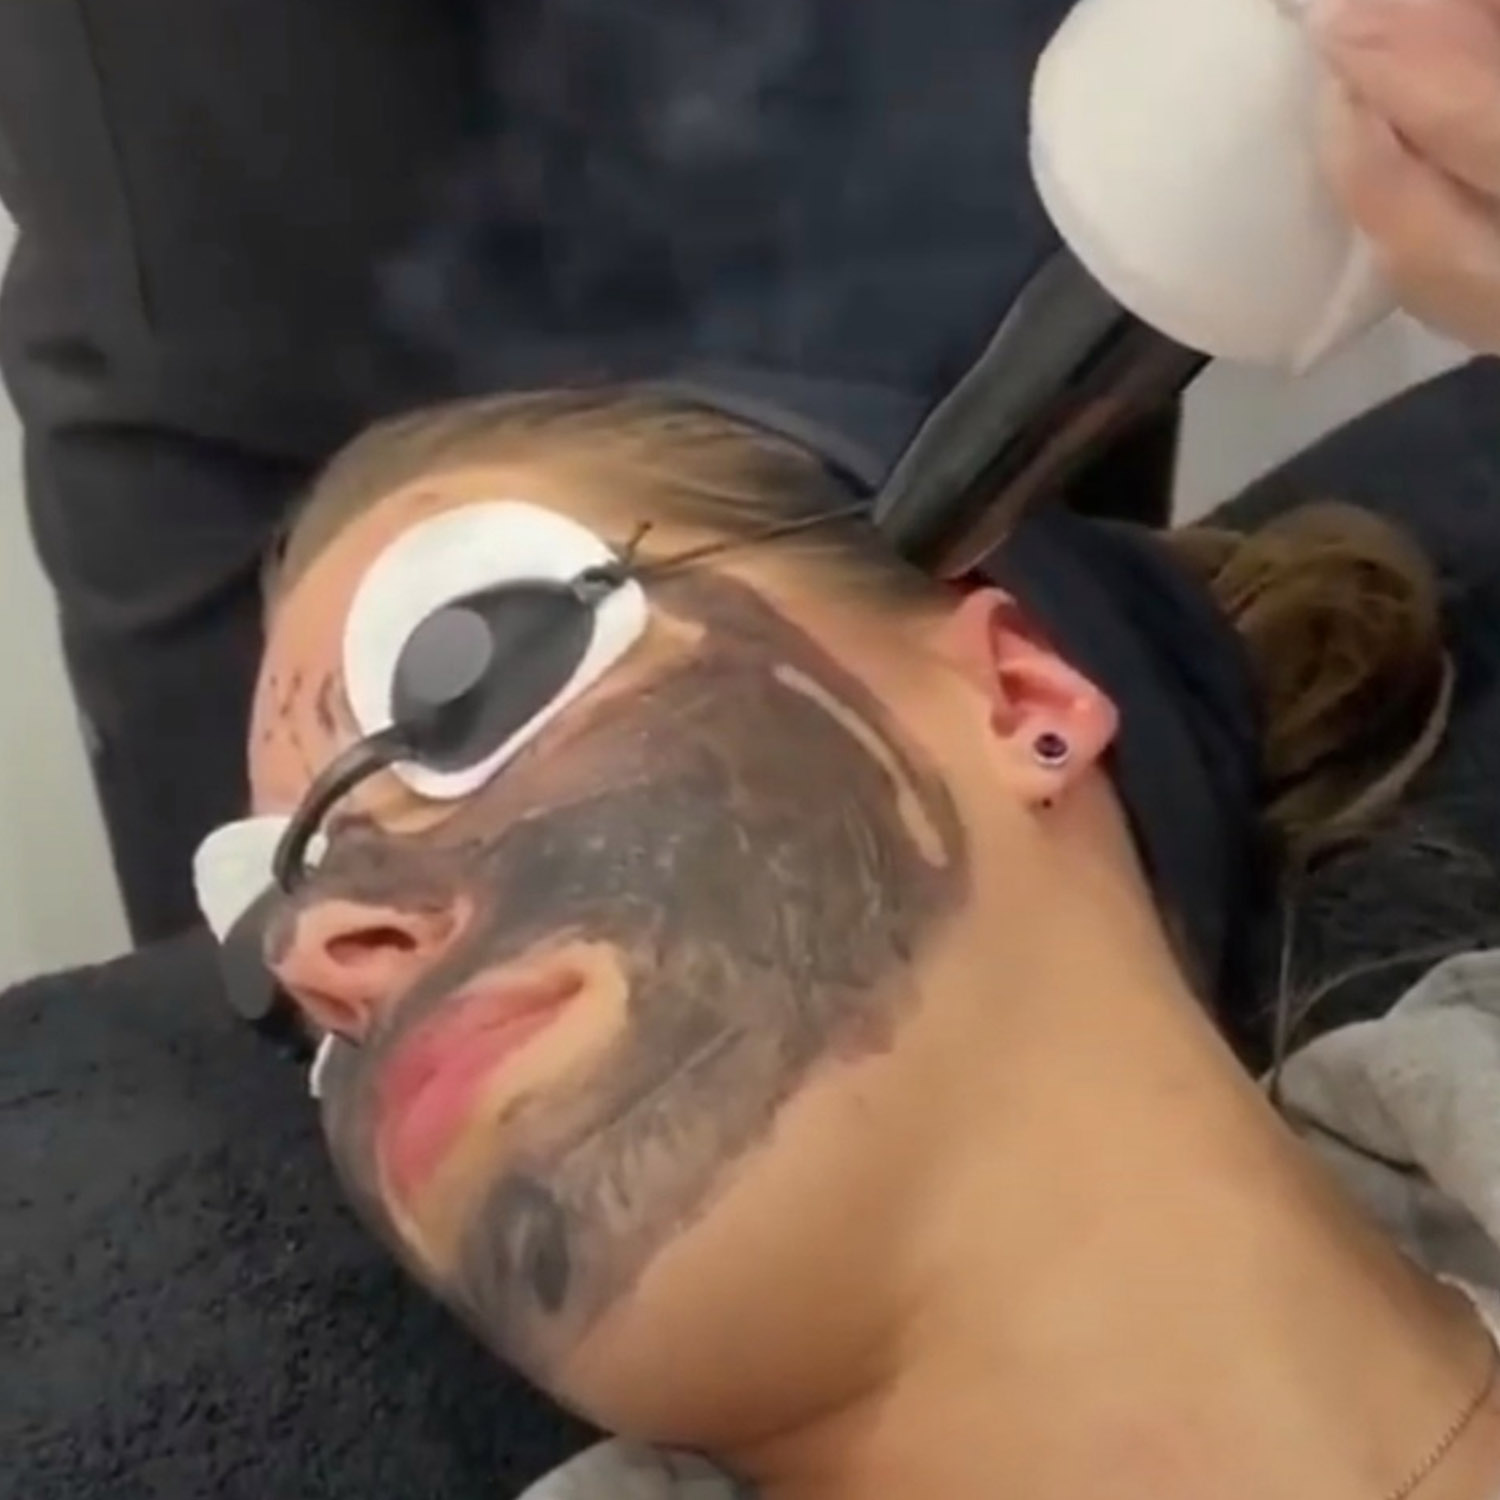 Carbon Spectra Peel using modern equipment and technique at Rejuvenate Laser & Skin Clinic